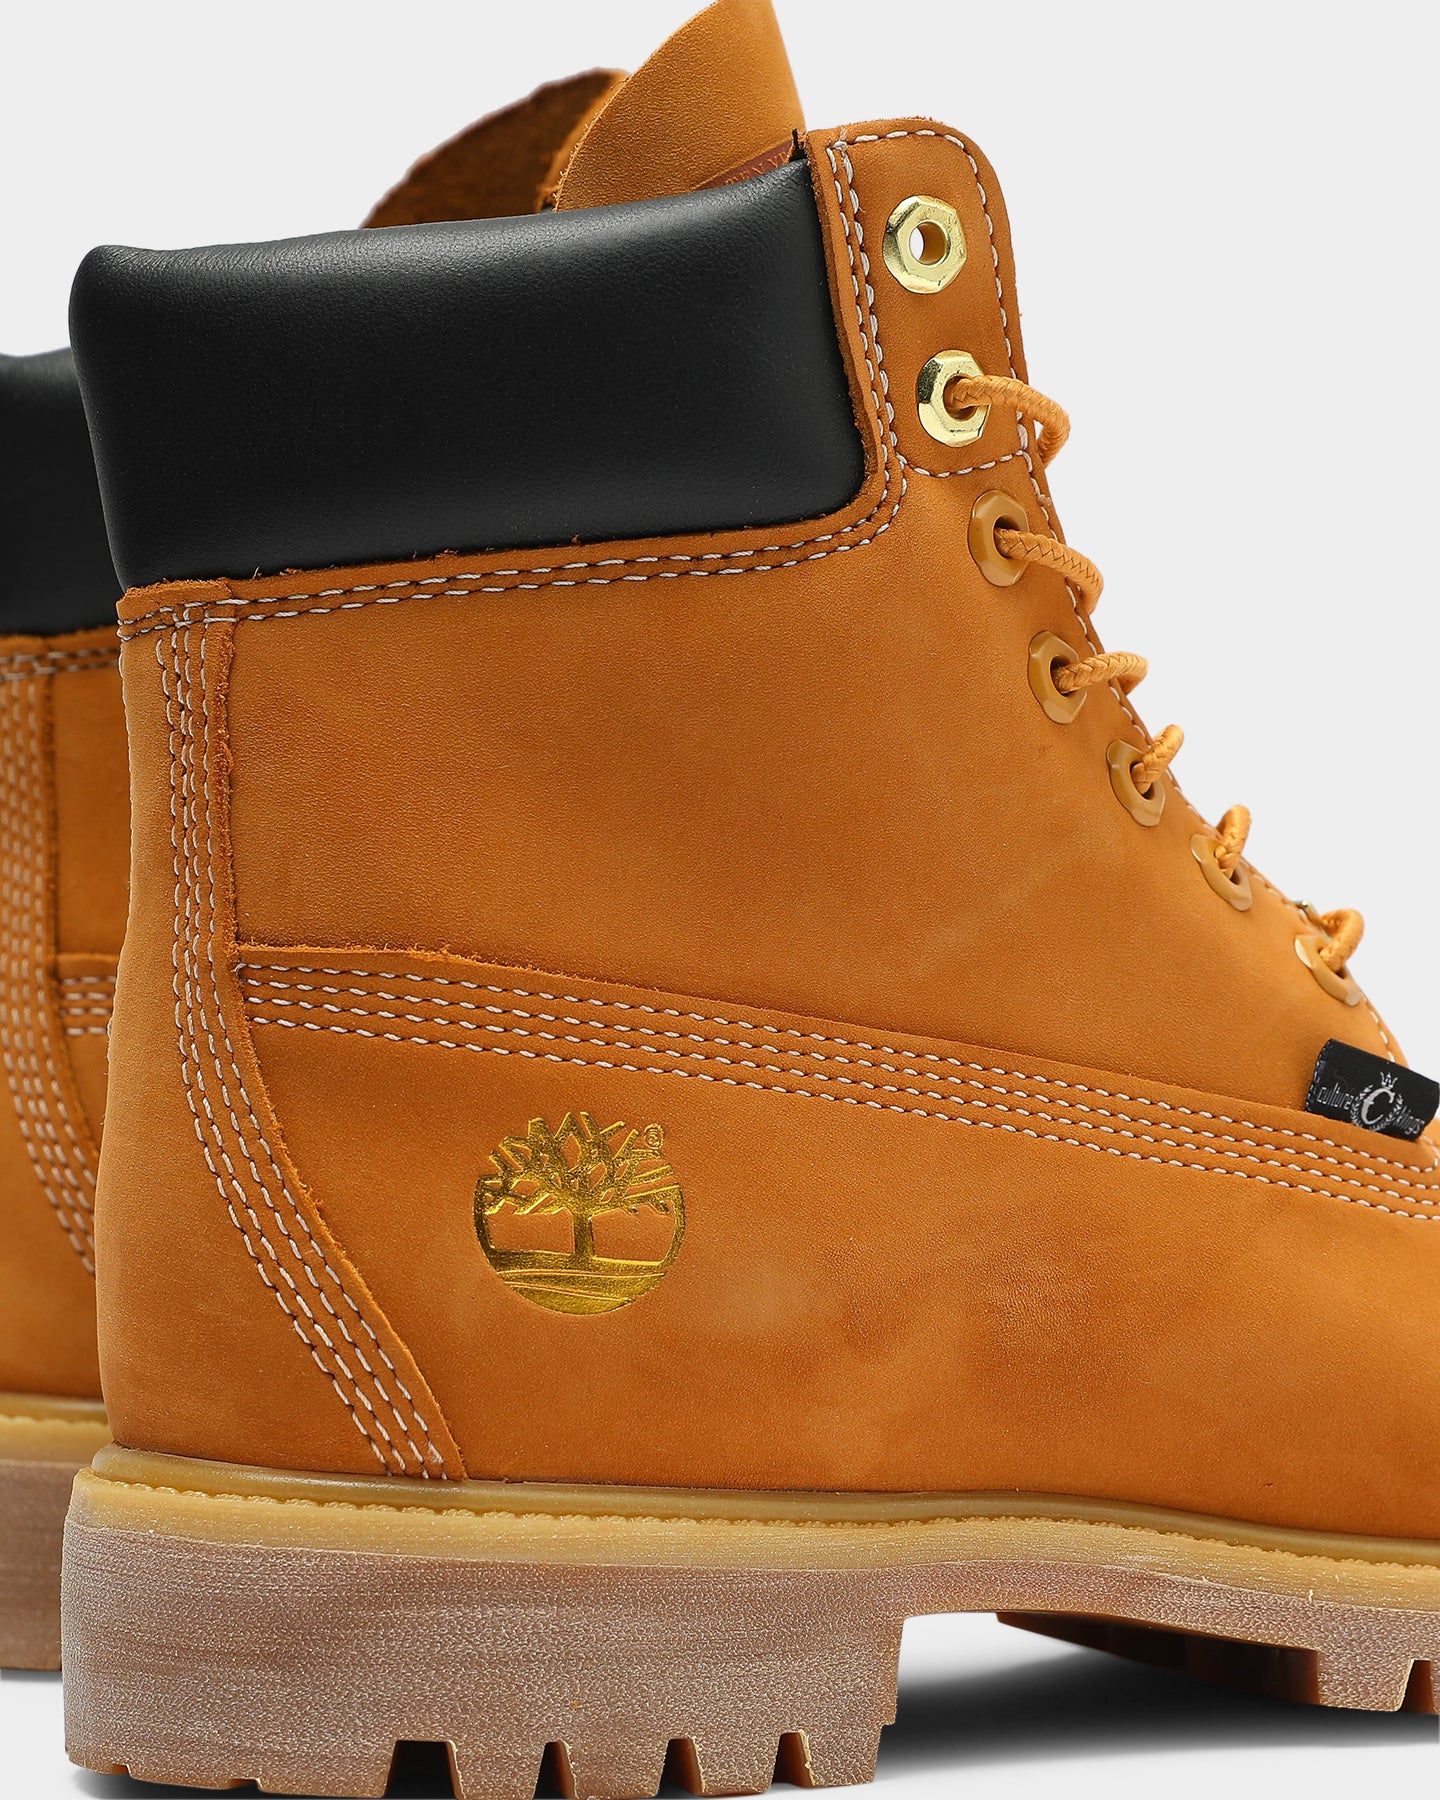 timberland x culture kings